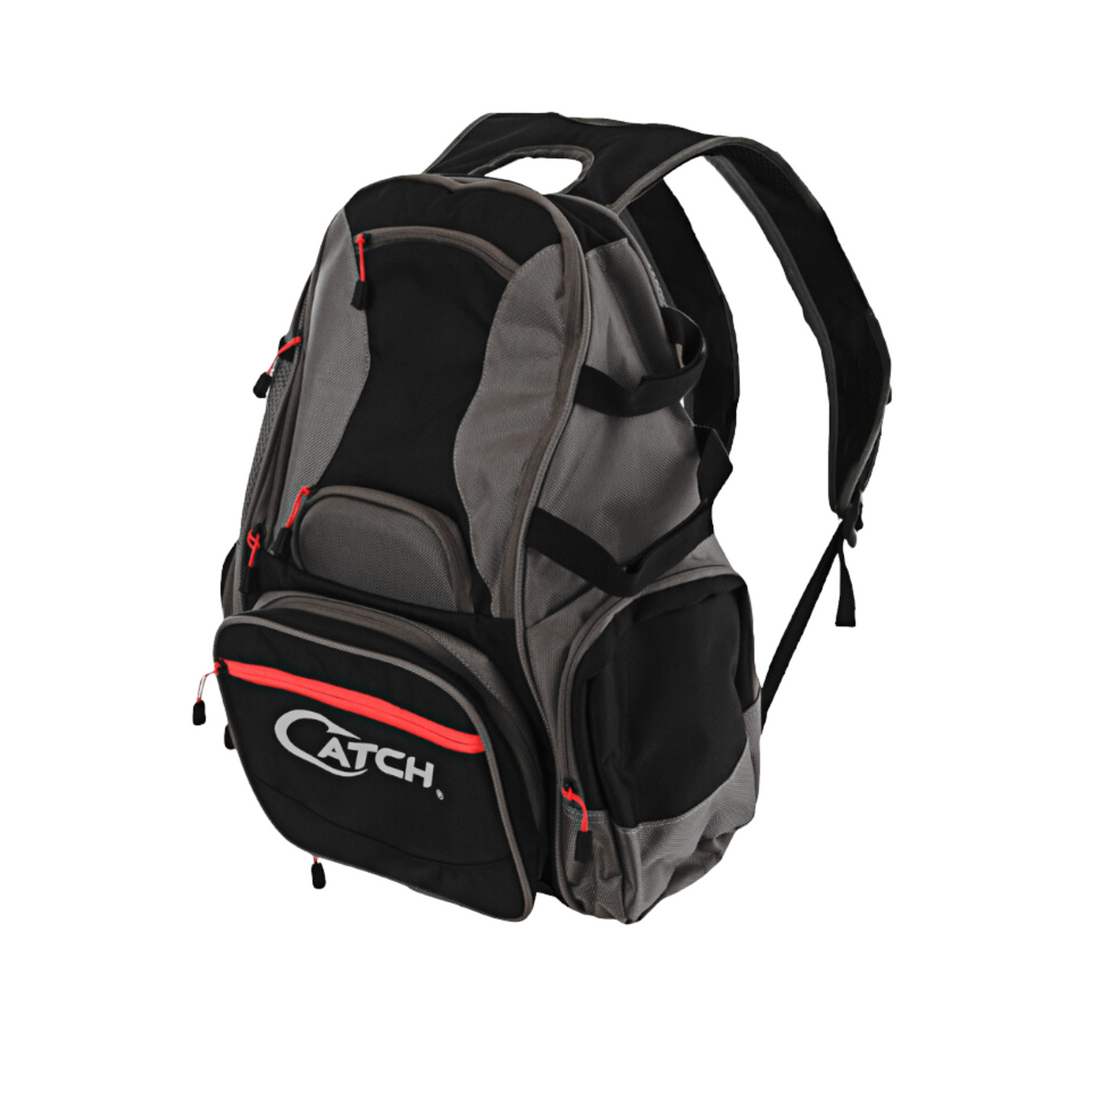 CATCH TACKLE PACK W/ COOLER COMPARTMENT